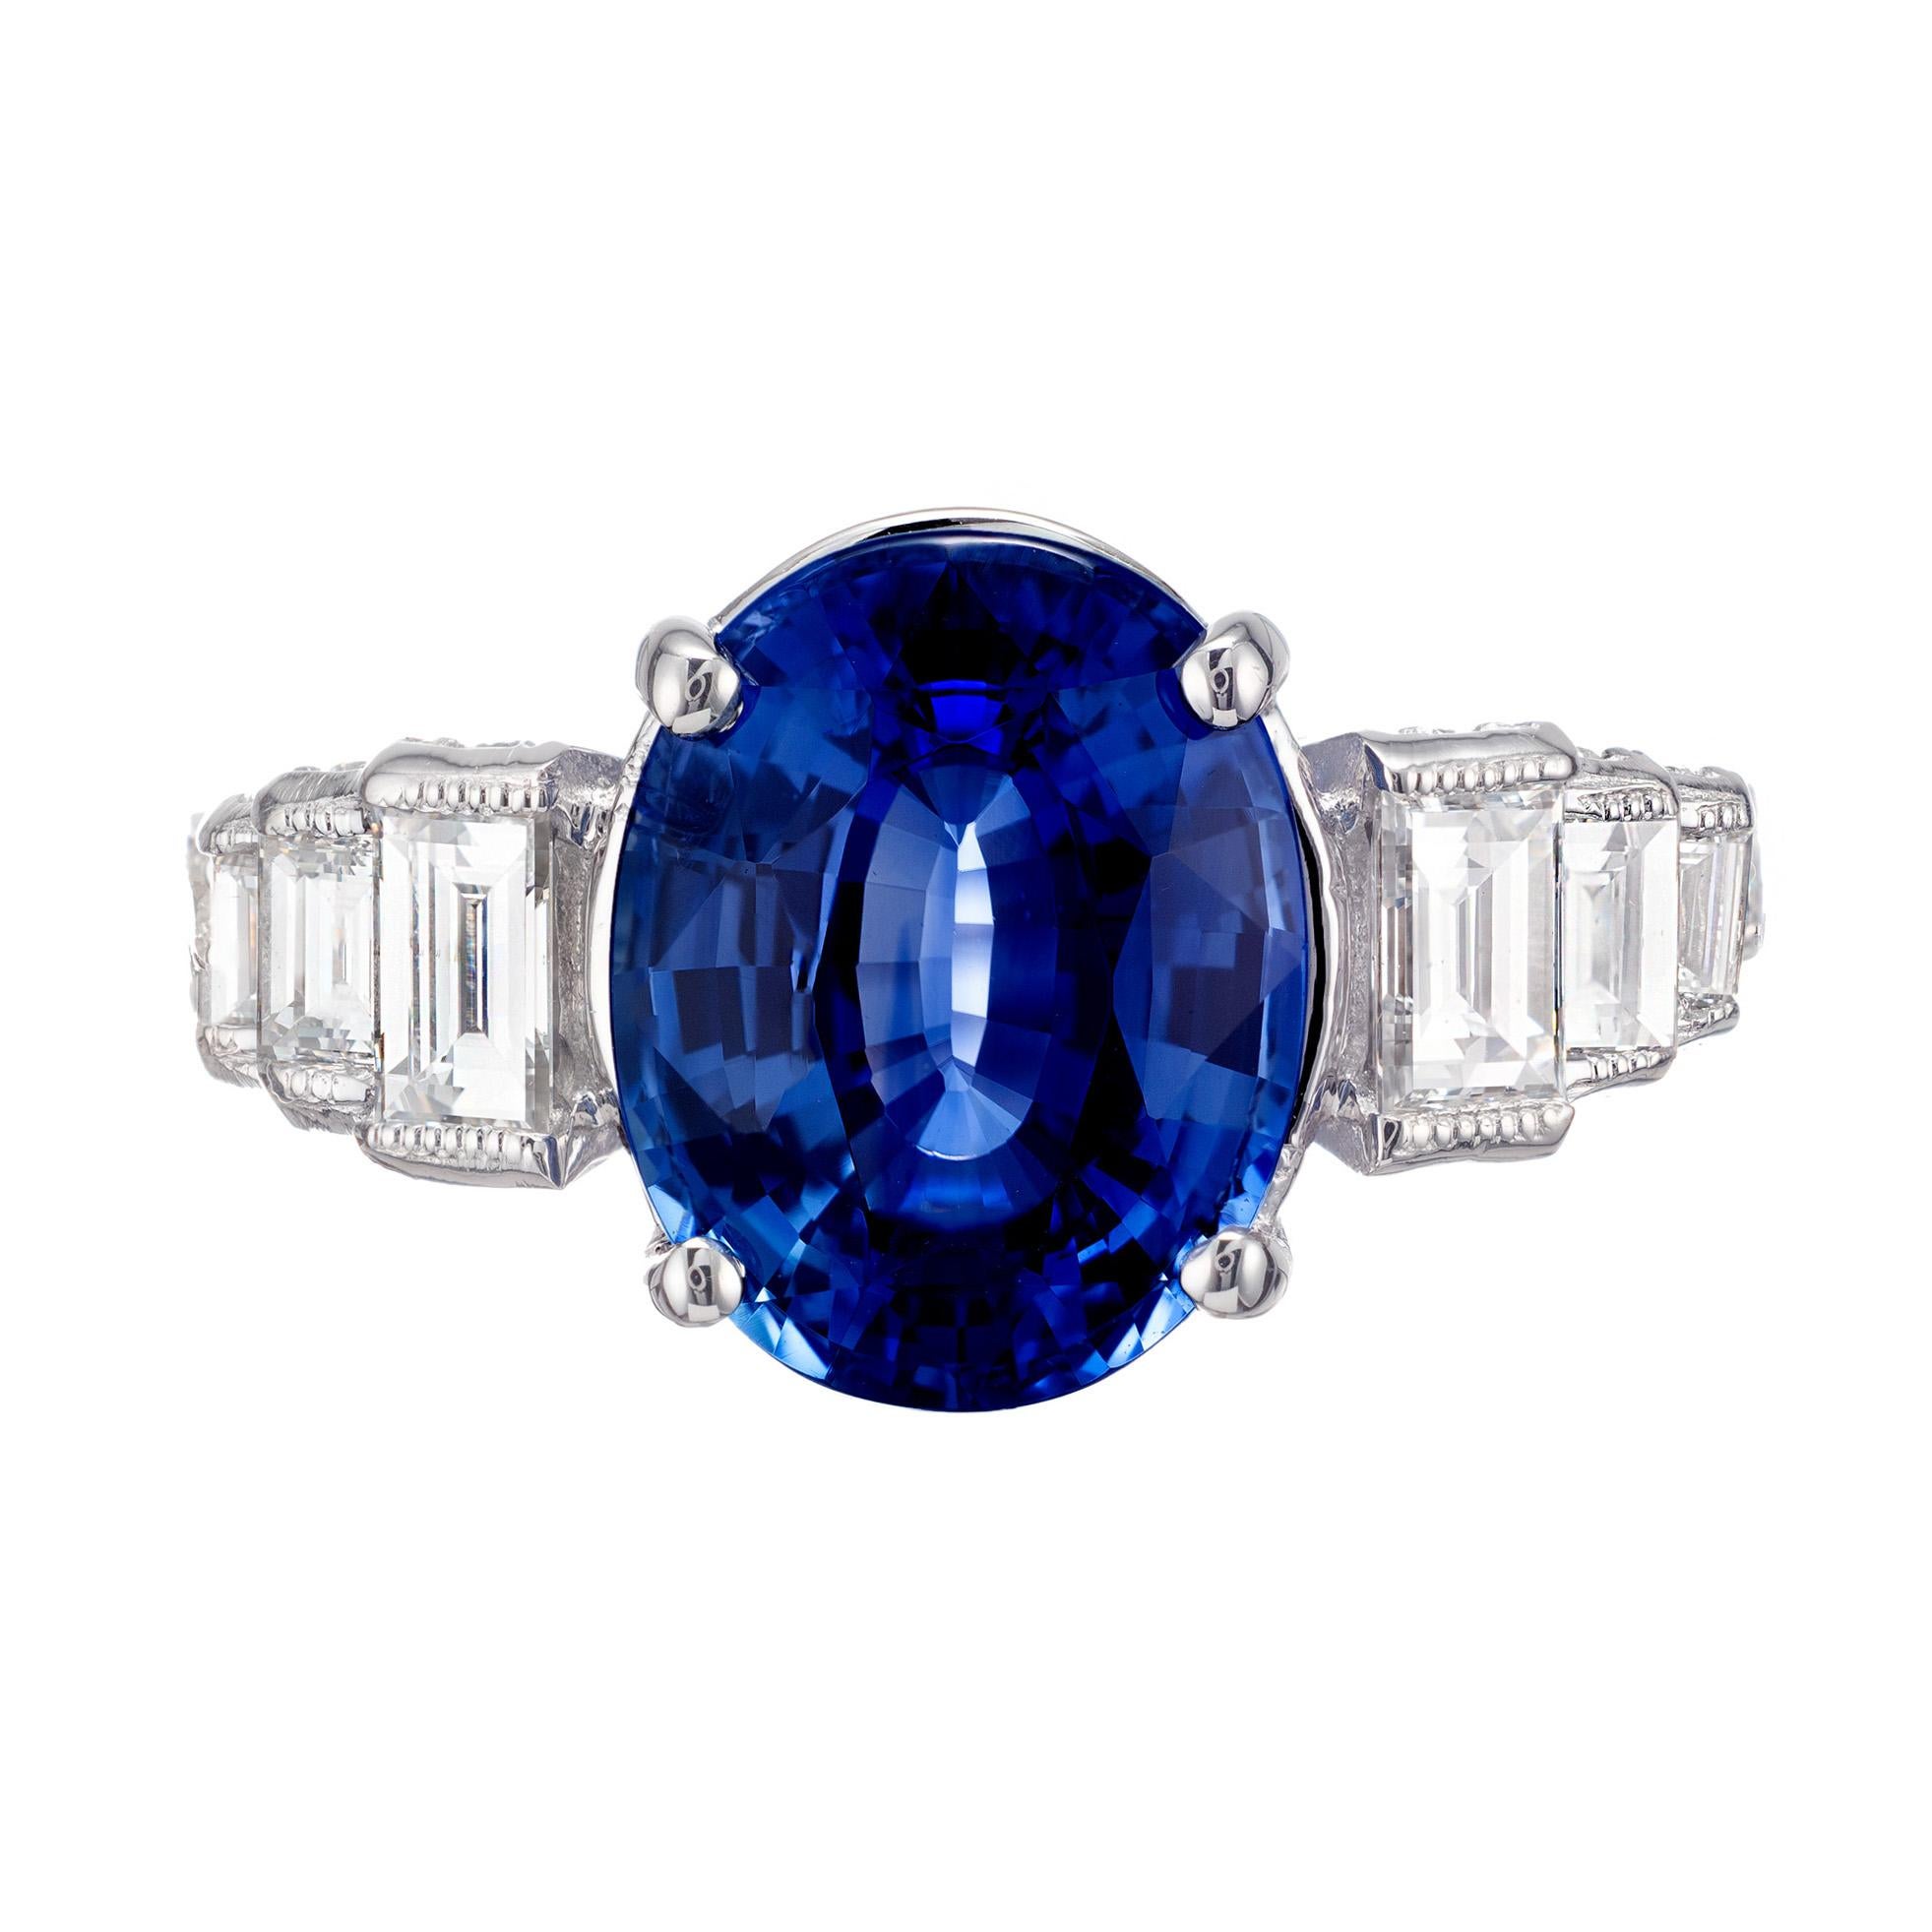 4.83ct oval sapphire and diamond engagement ring. Gia certified natural color, simple heat only, no residue. Center oval sapphire set in 18k white gold setting, accented with step cut and round diamonds. Designed and crafted in the Peter Suchy